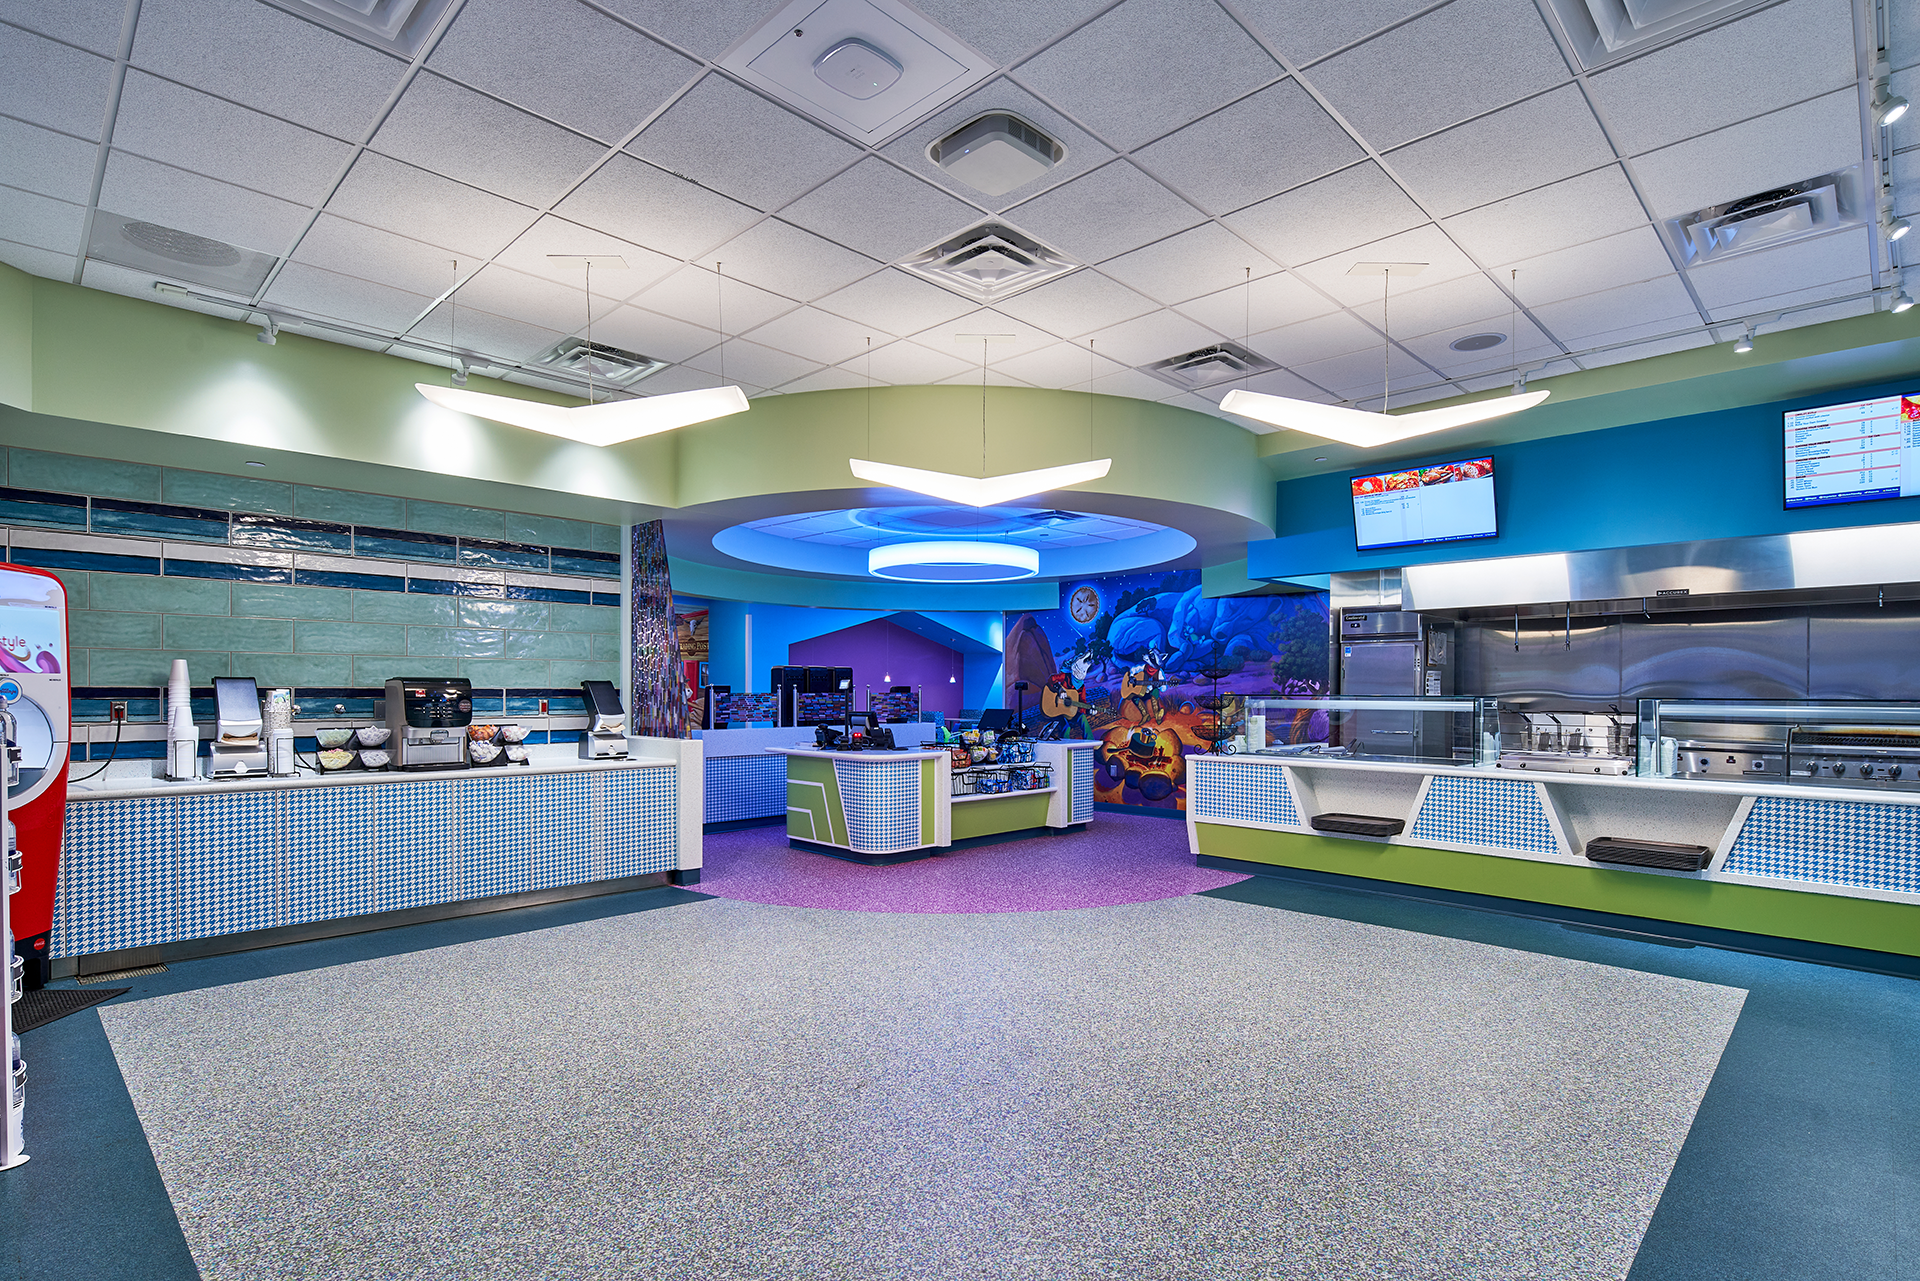 Image of Children's hospital canteen with bright blue and white lighting